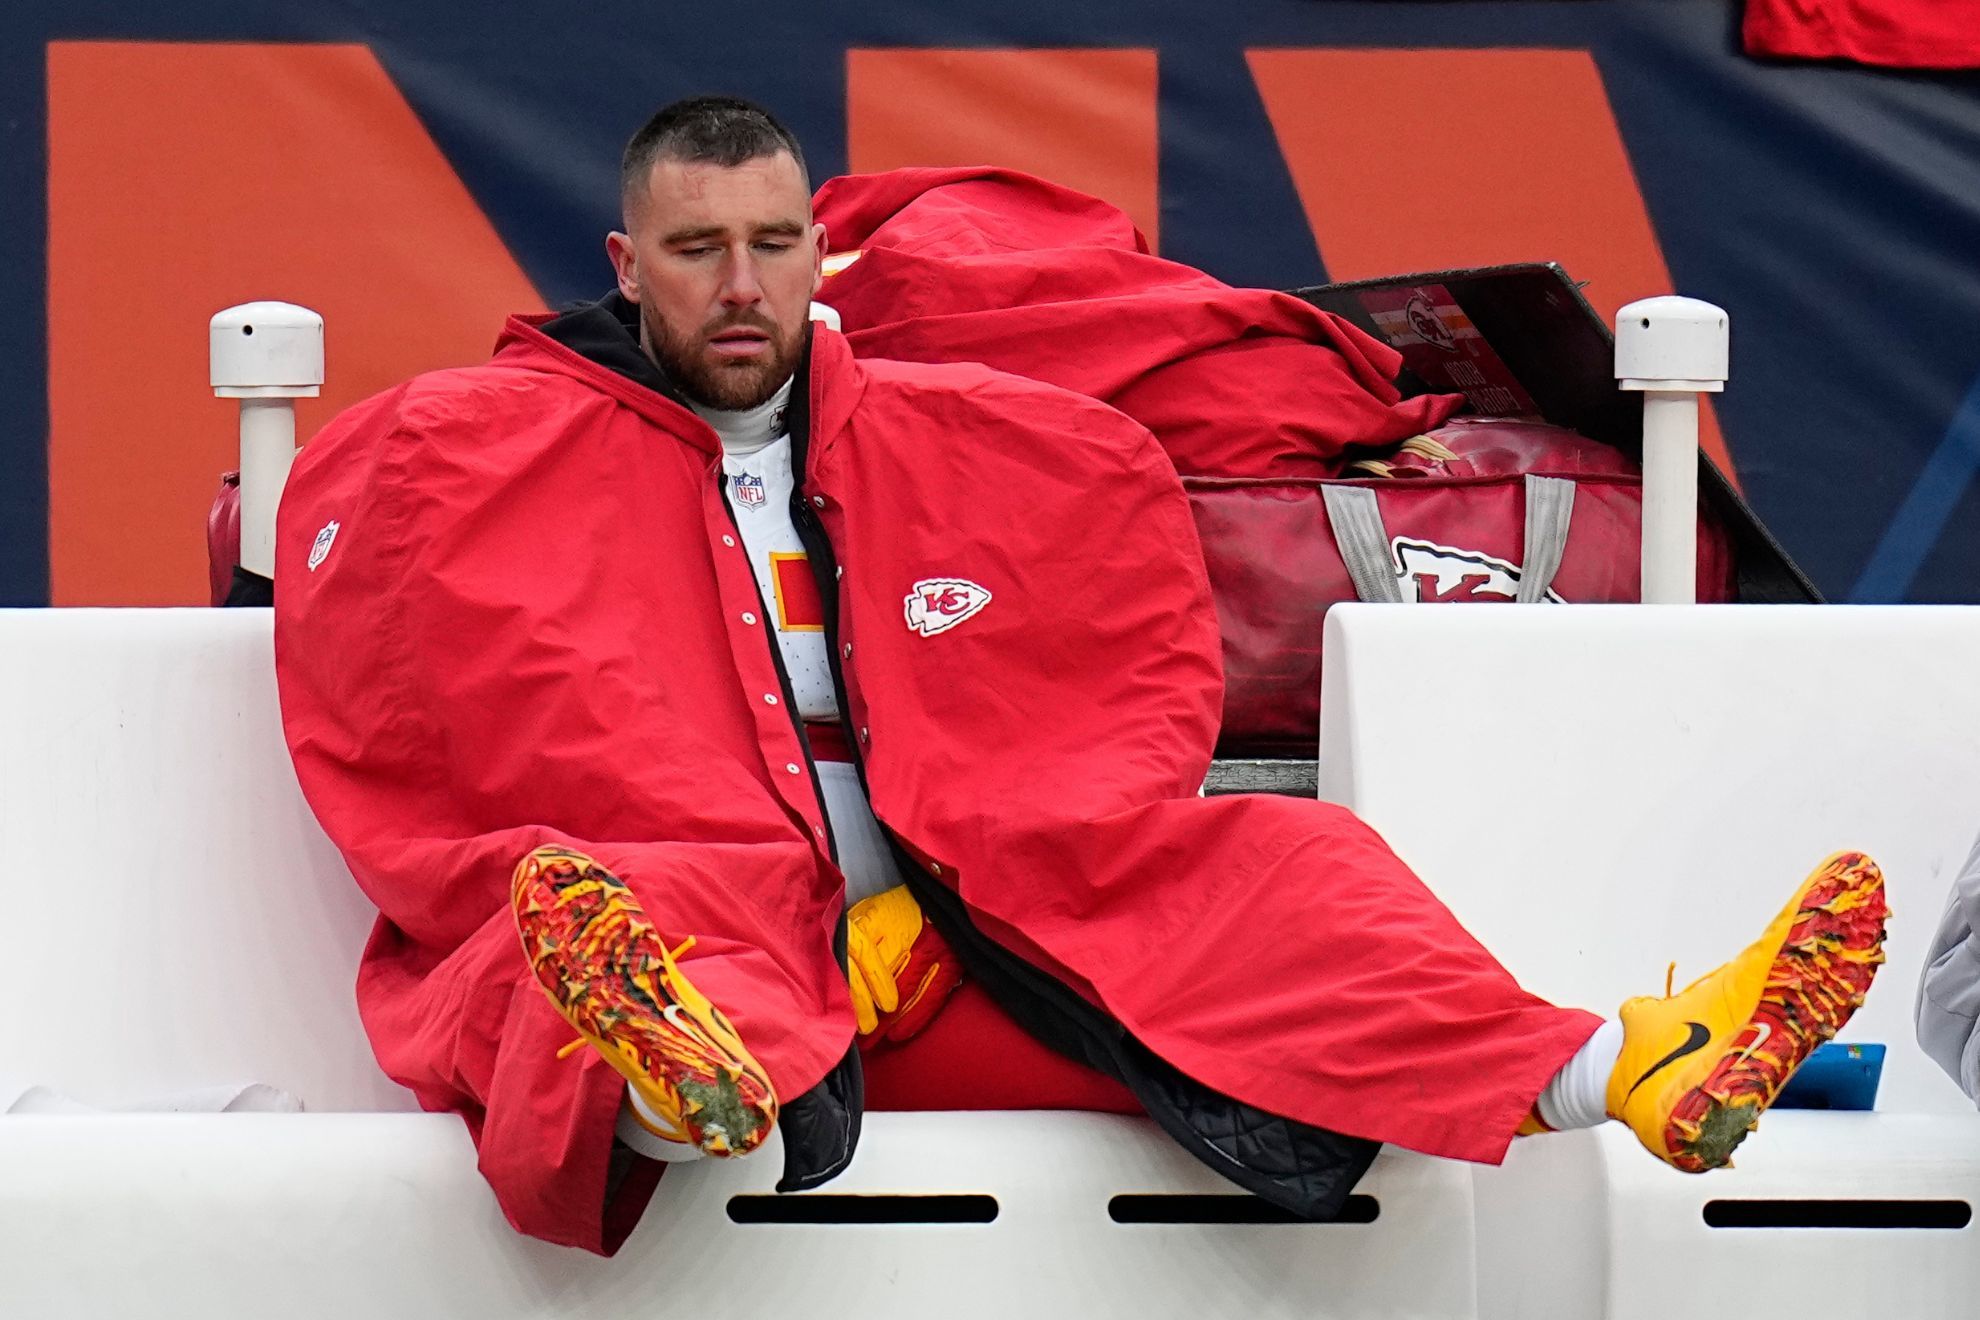 Broncos play Taylor Swift song after beating Chiefs, Travis Kelce again struggles without her